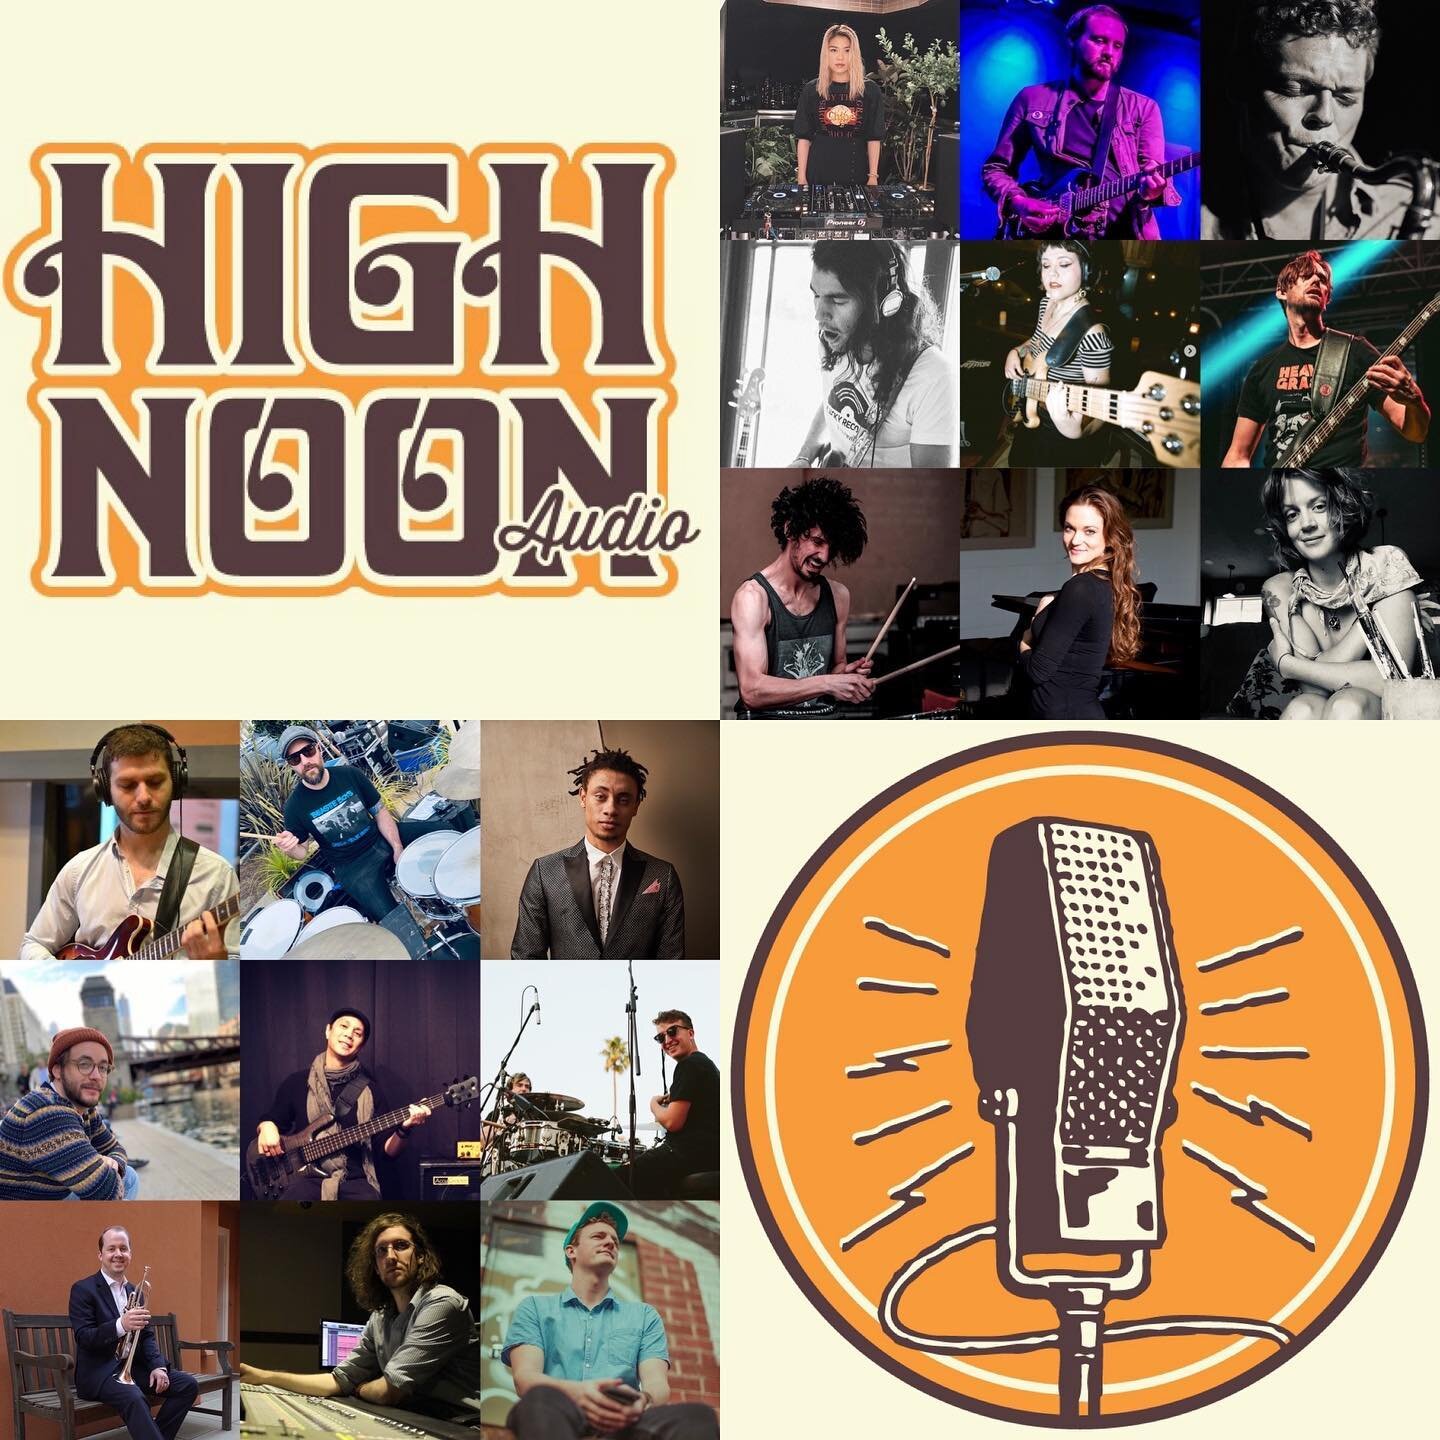 Hire a musician through the High Noon Audio network! All are professional, trusted musicians, who can record any style you need, safely, and remotely. 

To see the list, go to: 

HighNoonAudio.com/Rates 

All of these musicians are incredible players